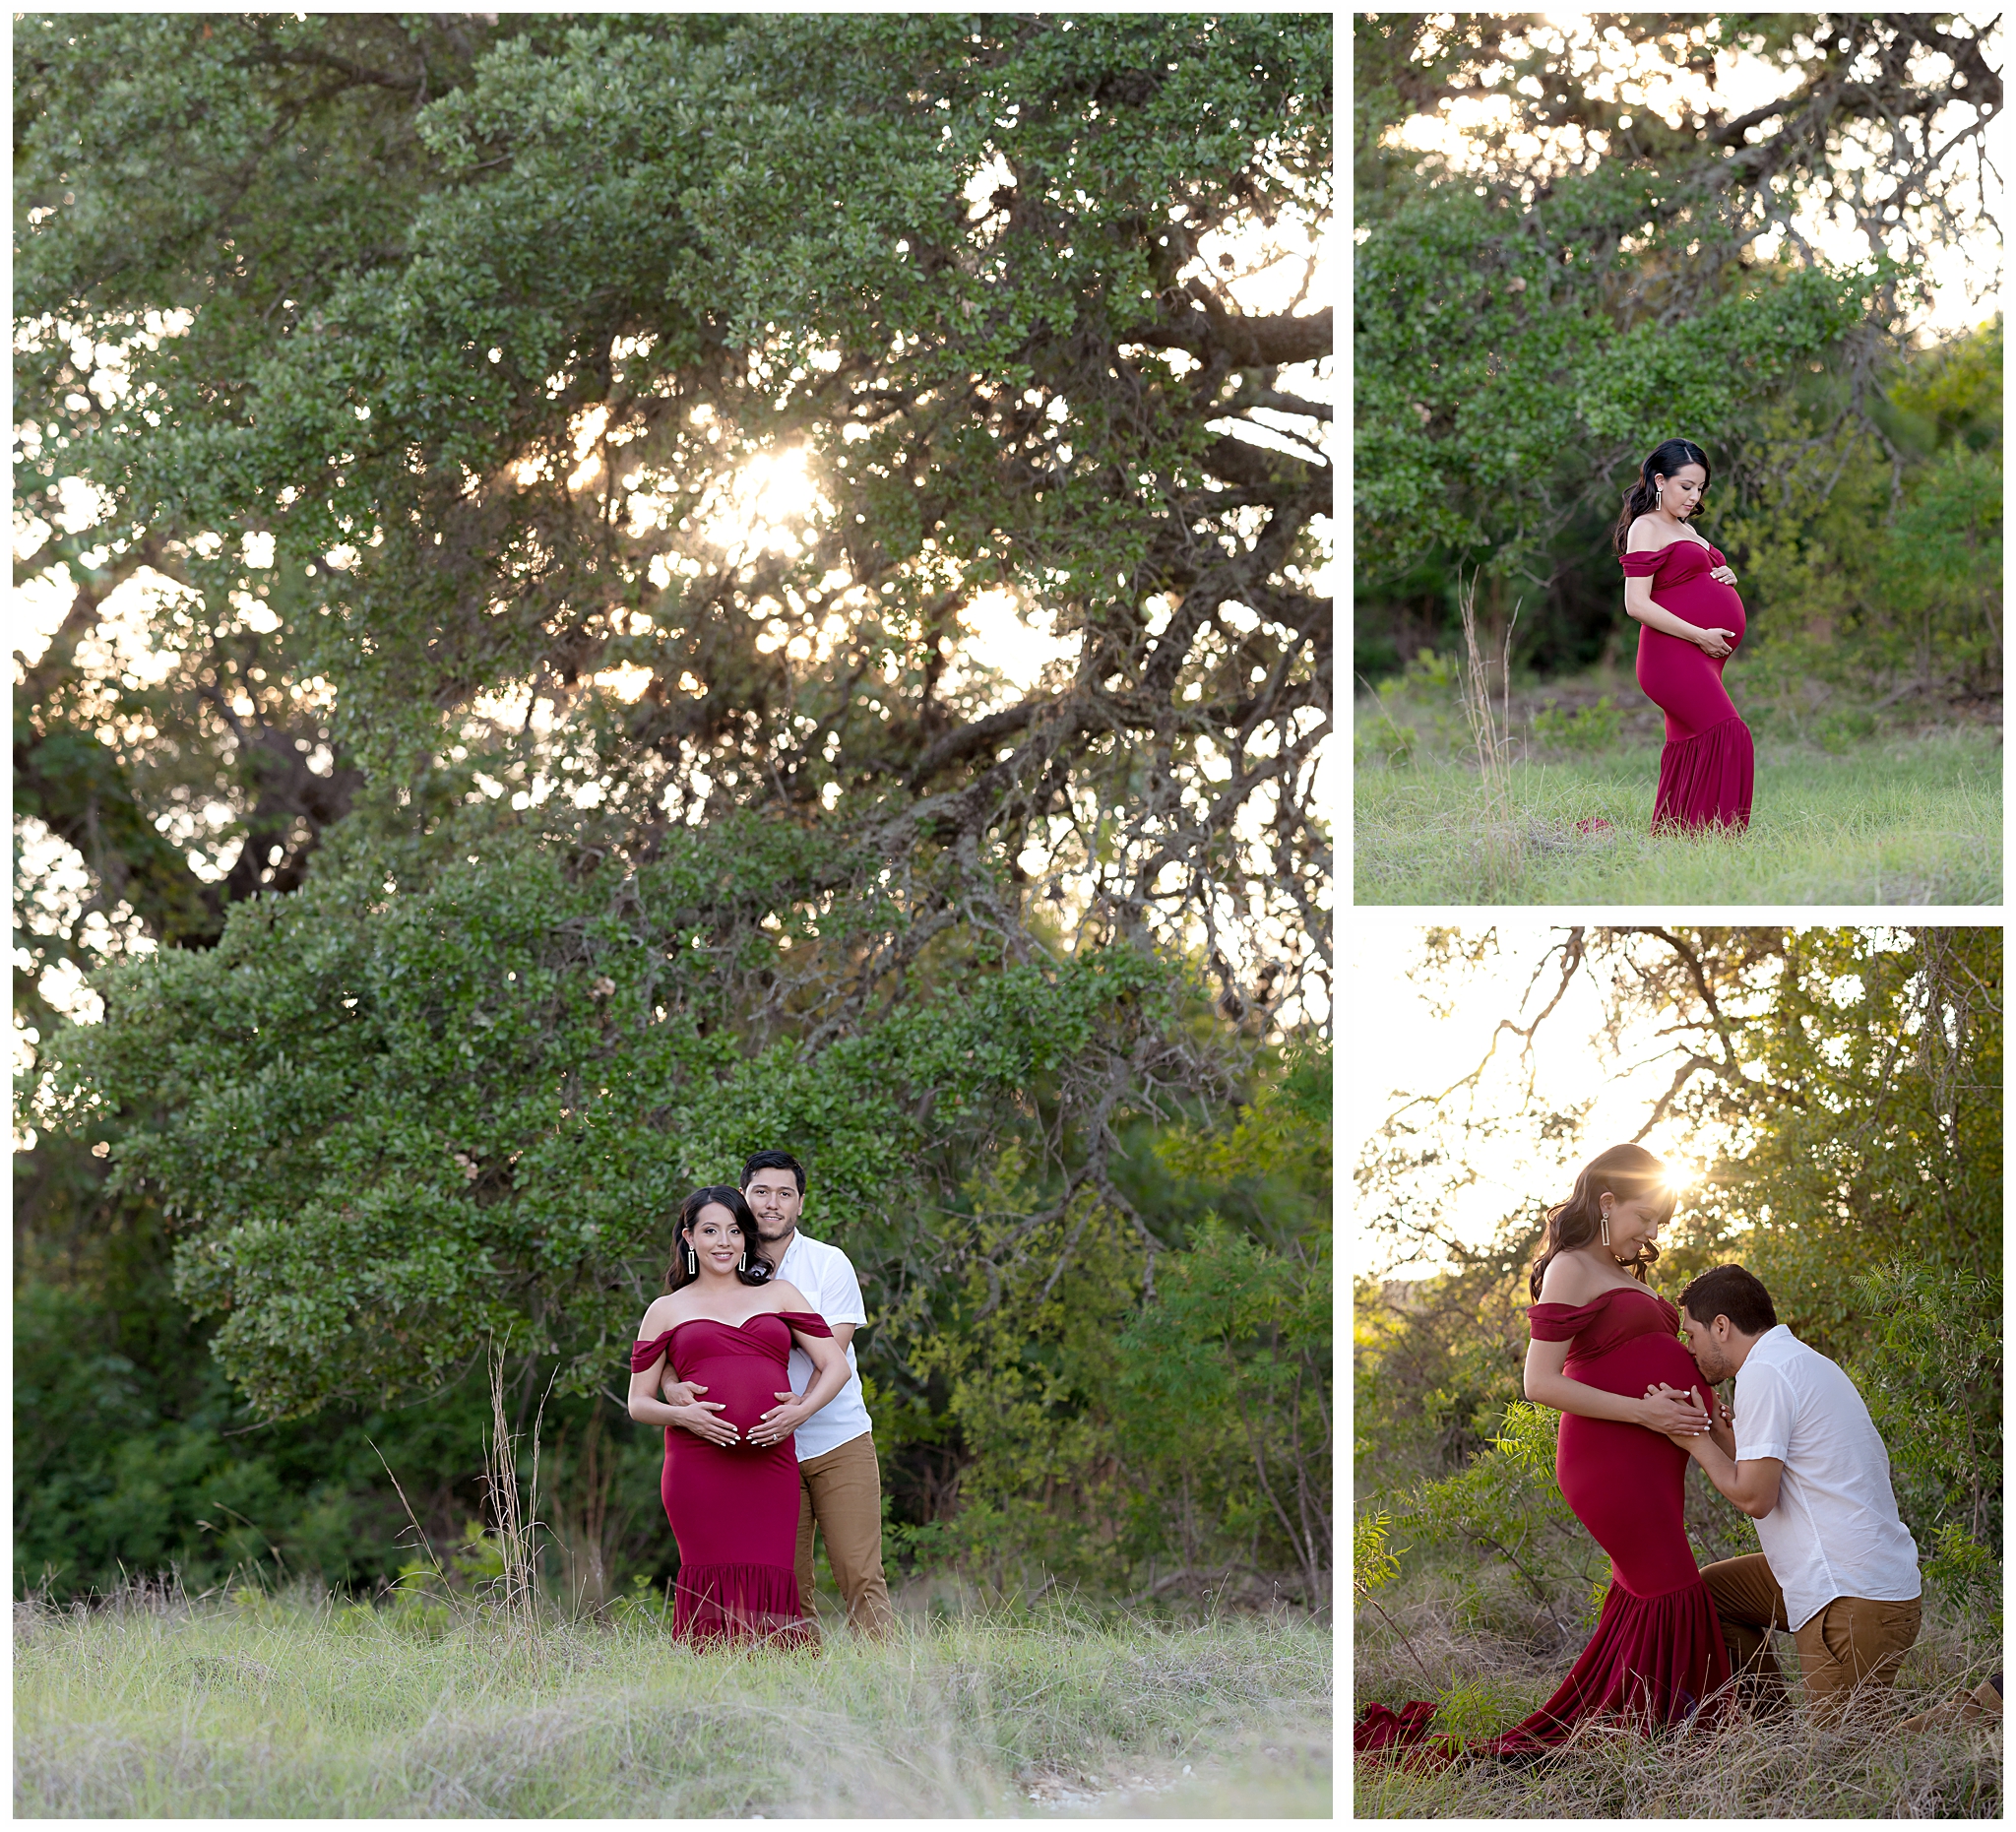 Collage of outdoor maternity pictures with couple